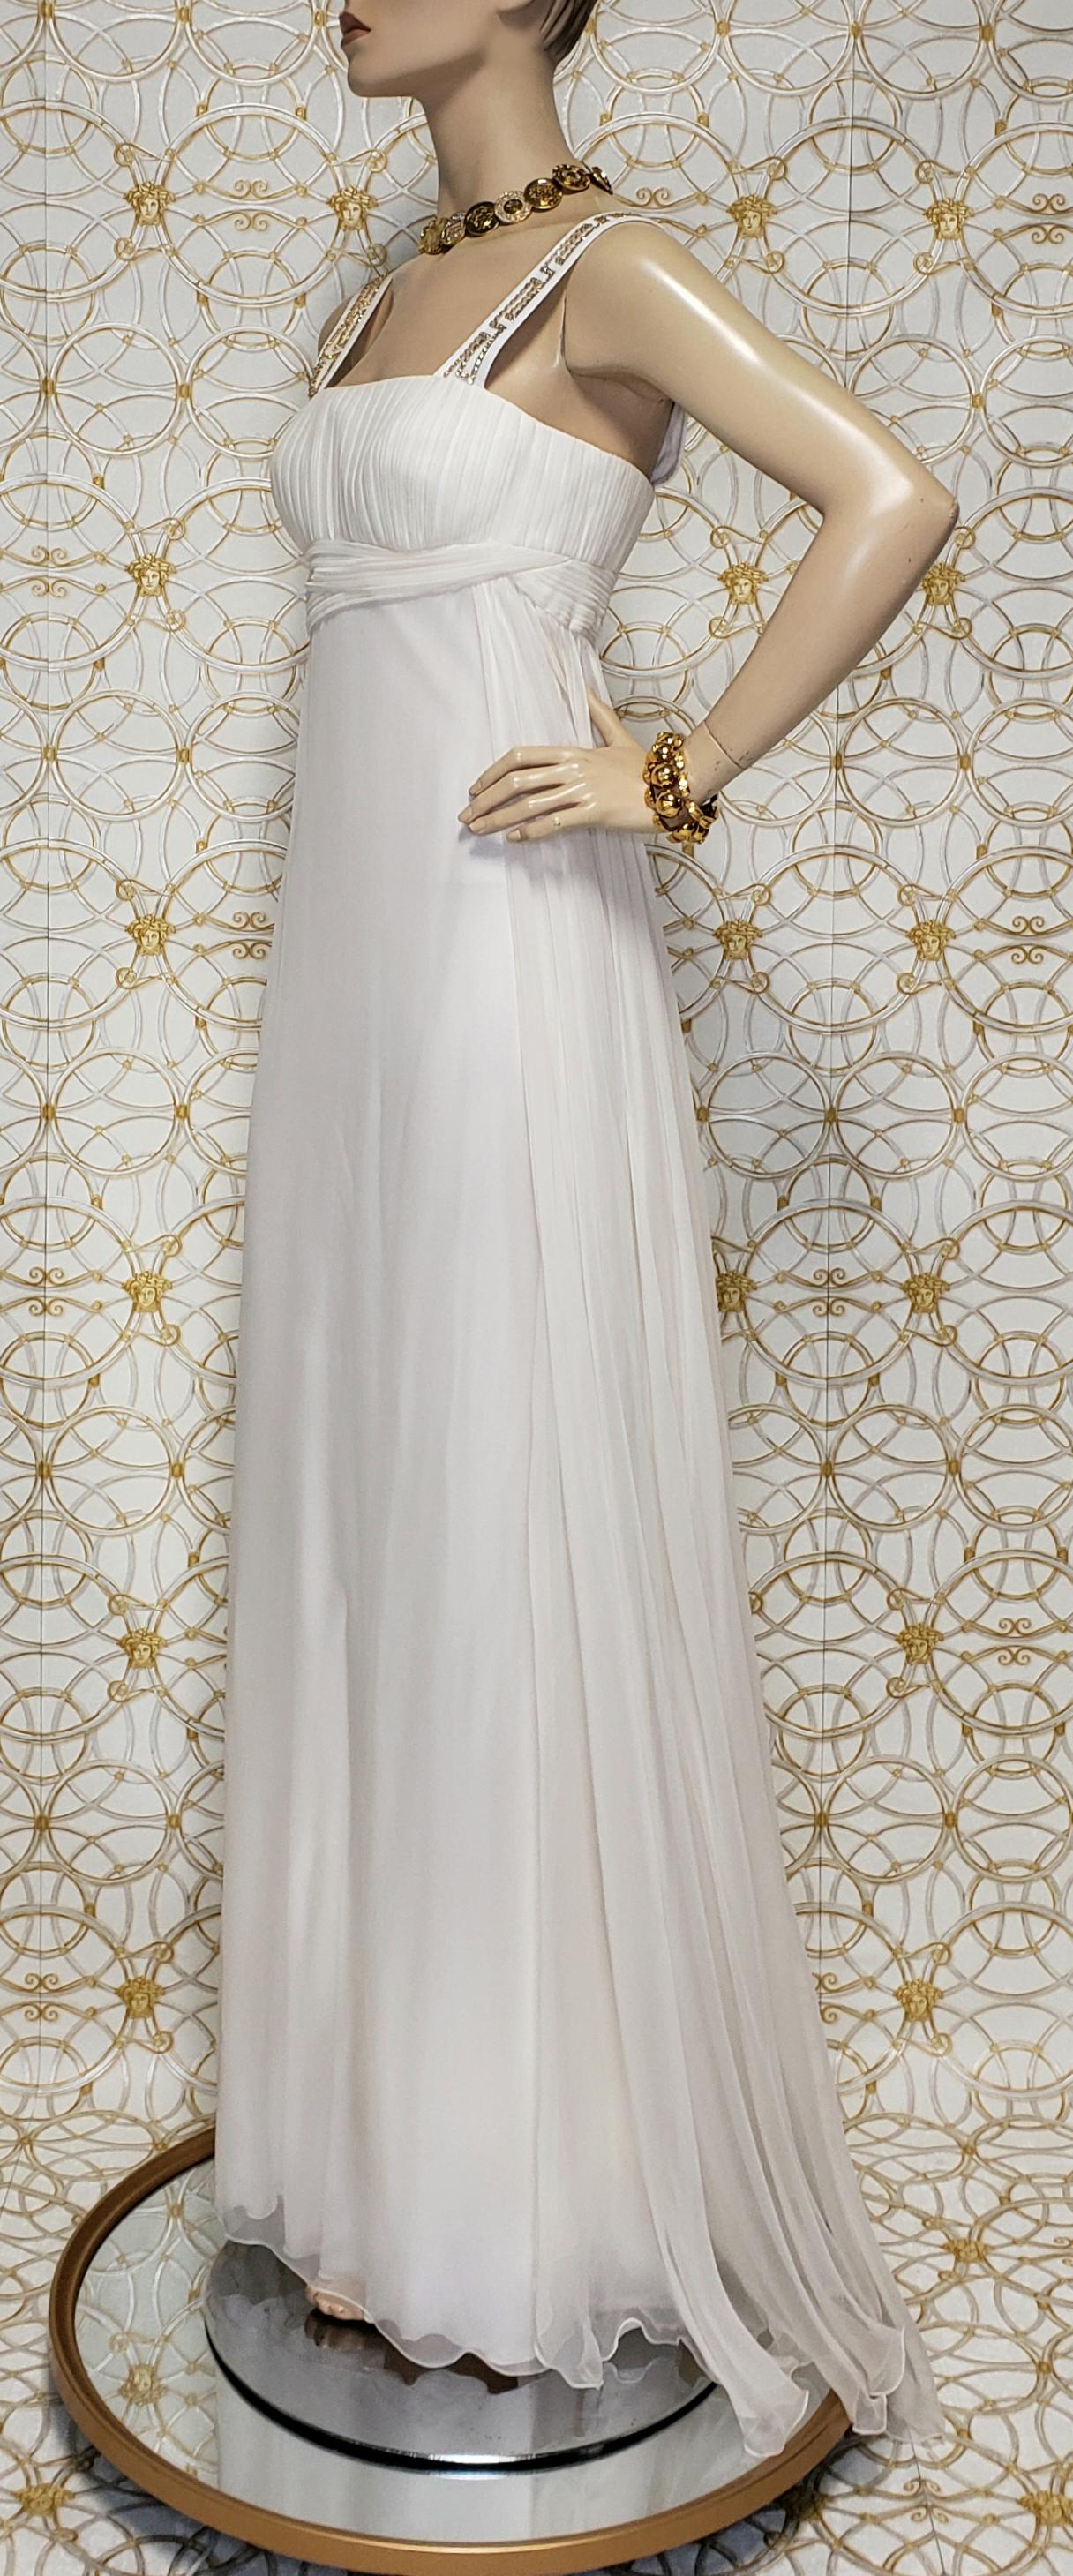 New Versace Crystal Embellished White Silk Gown 44 - 8 For Sale 2